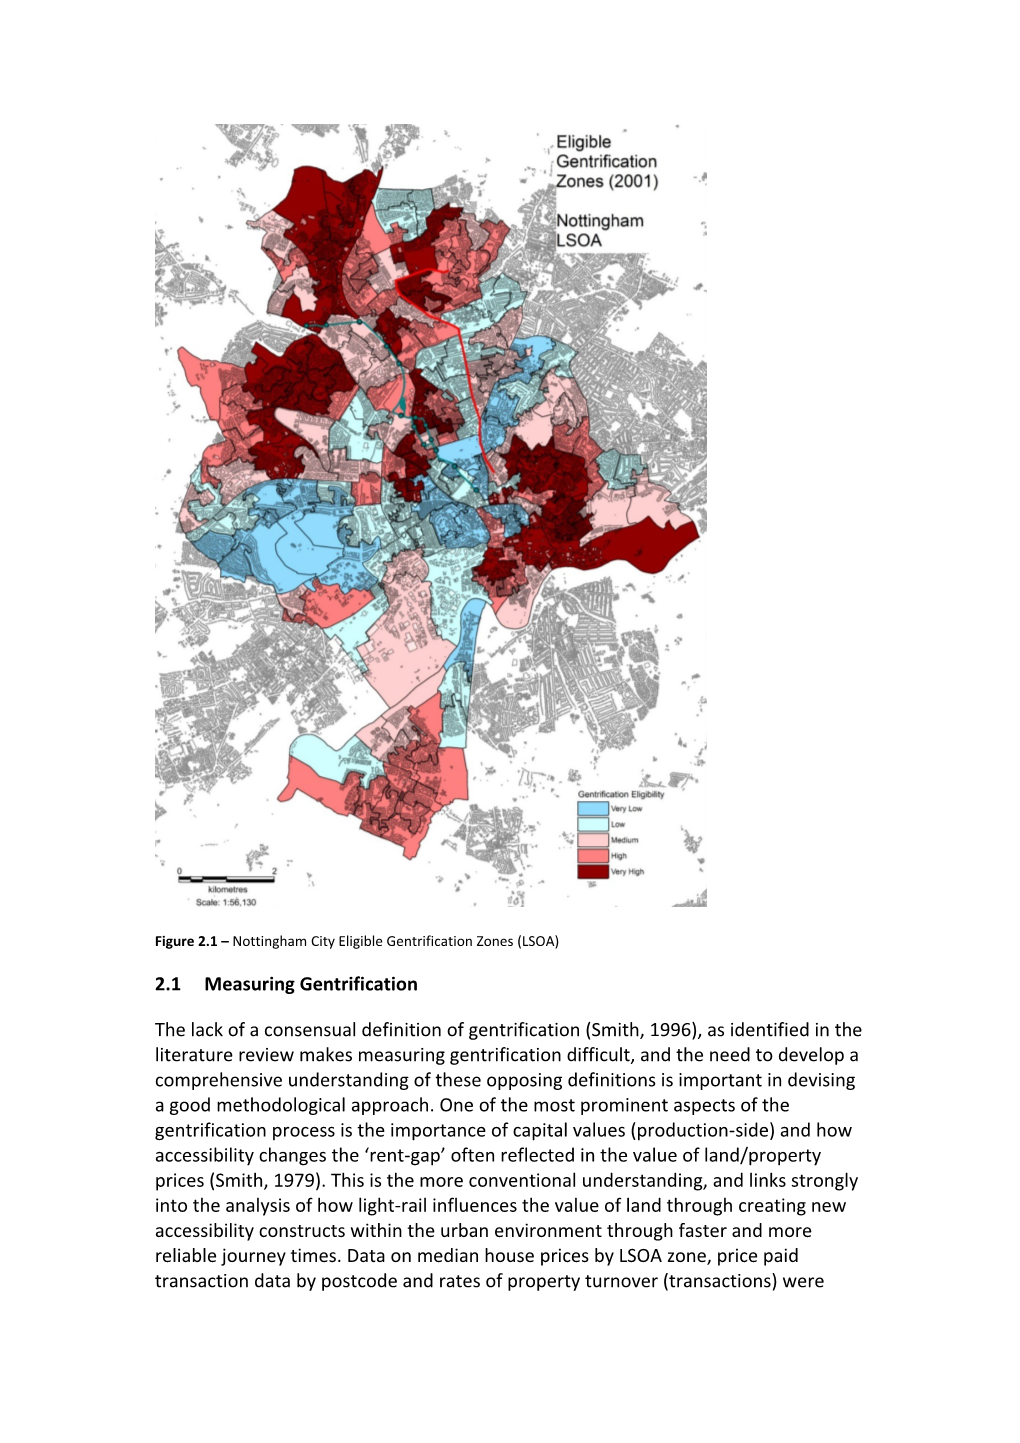 Evaluating the Impact of Light-Rail on Urban Gentrification: Quantiative Evidence From